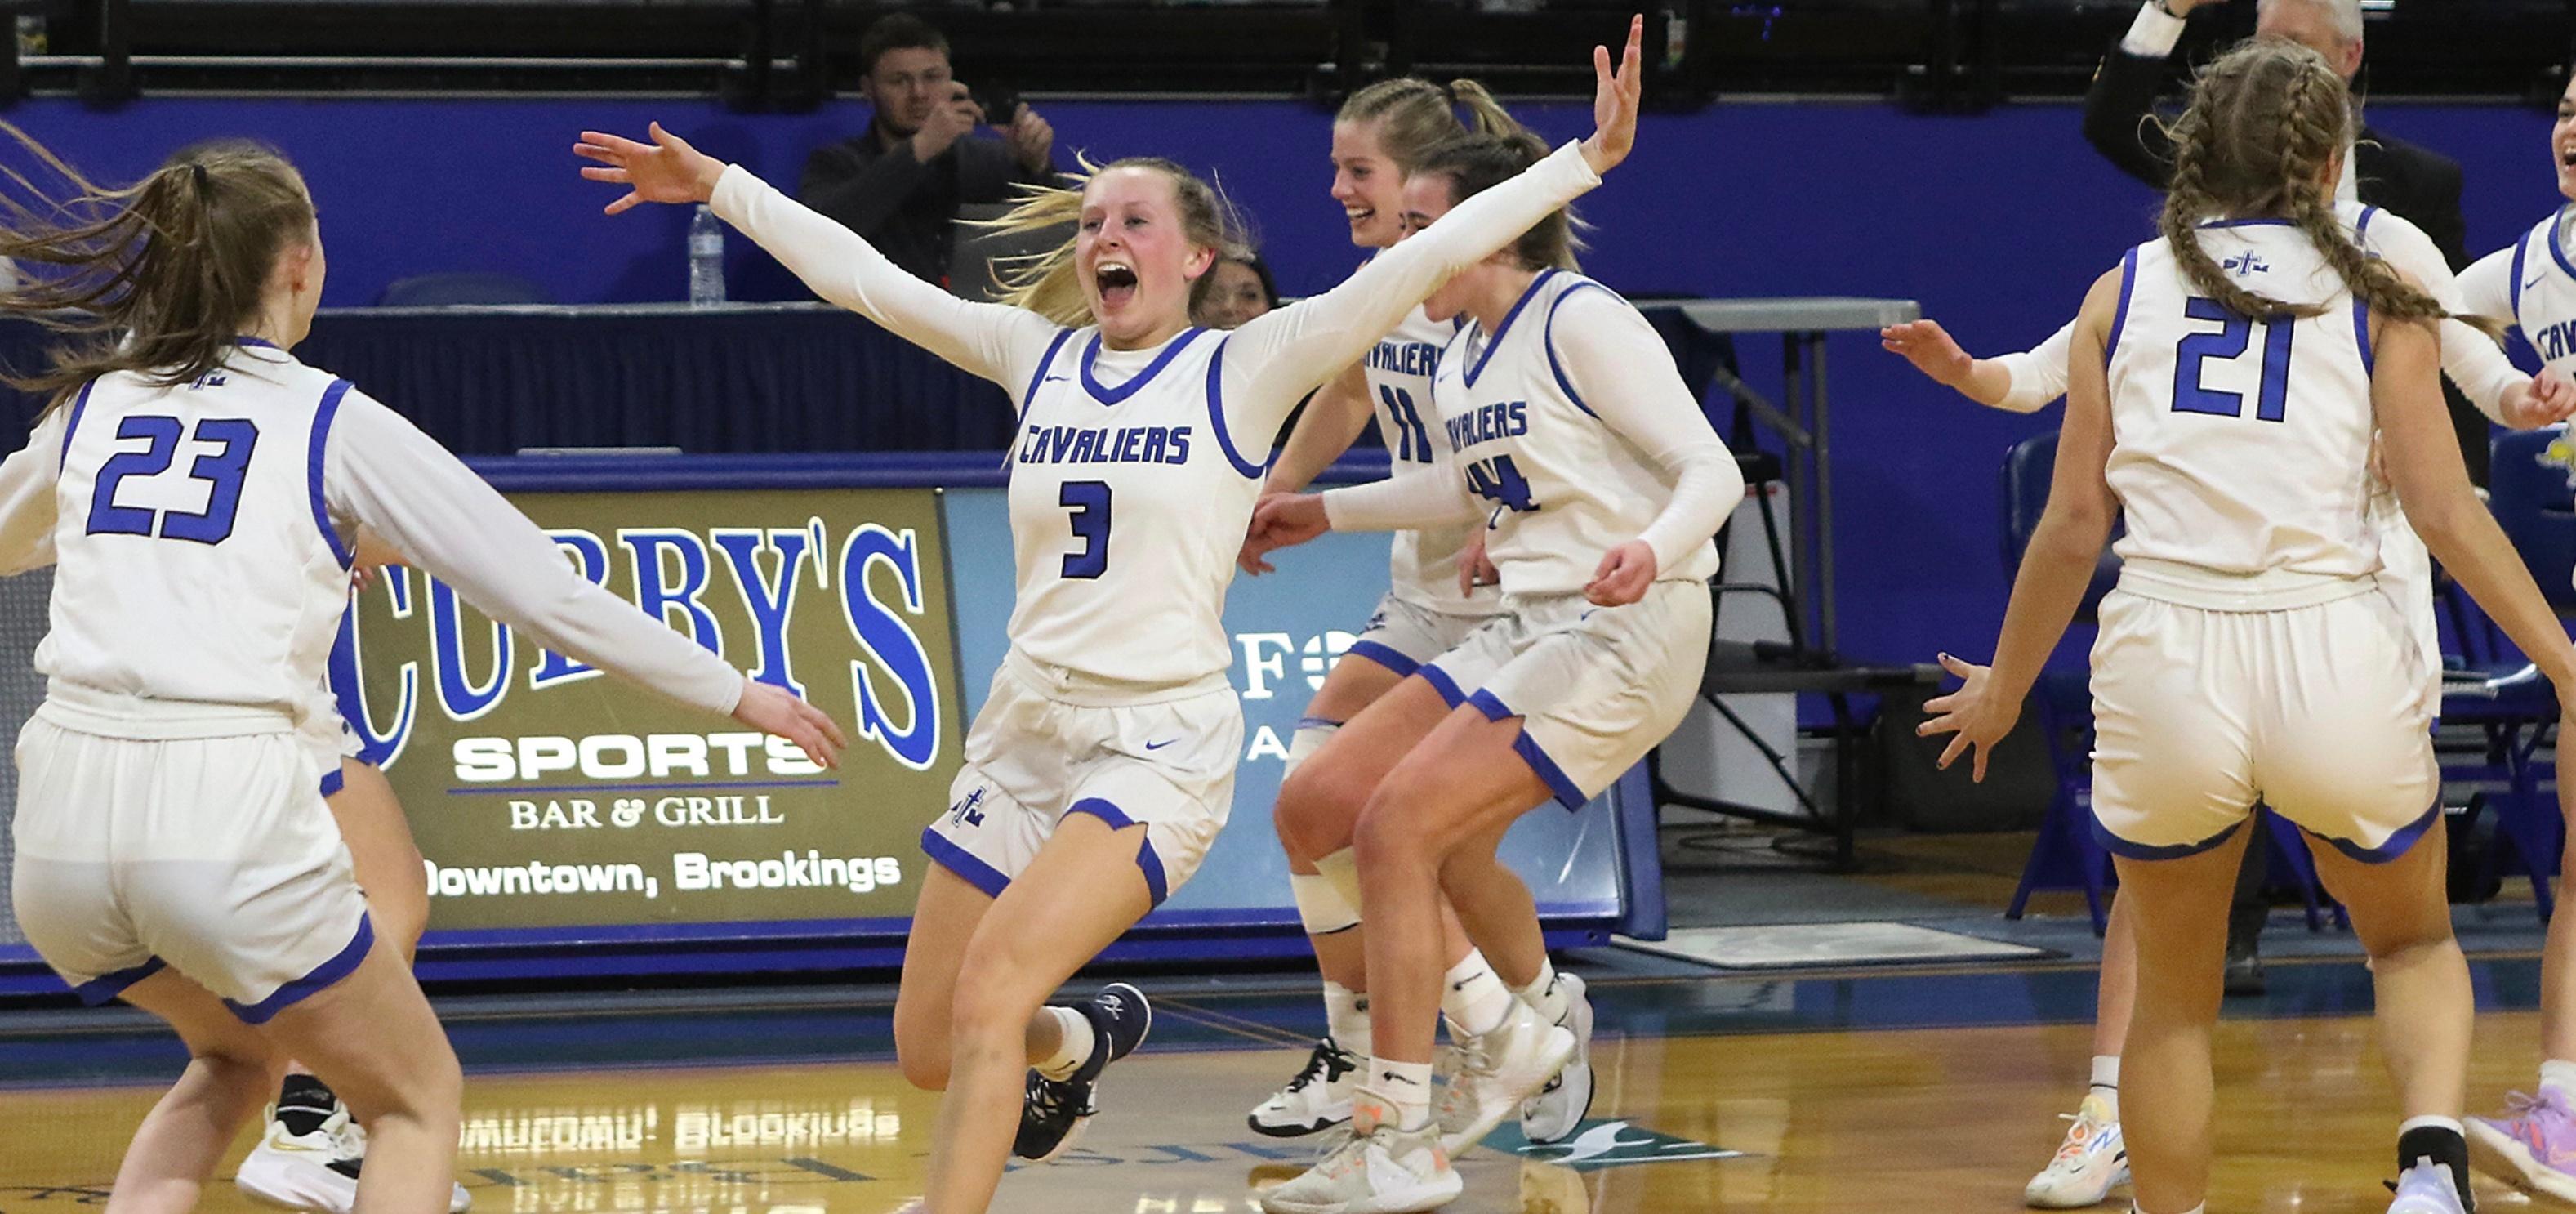 Strong Defense Lifts St. Thomas More to State Championship